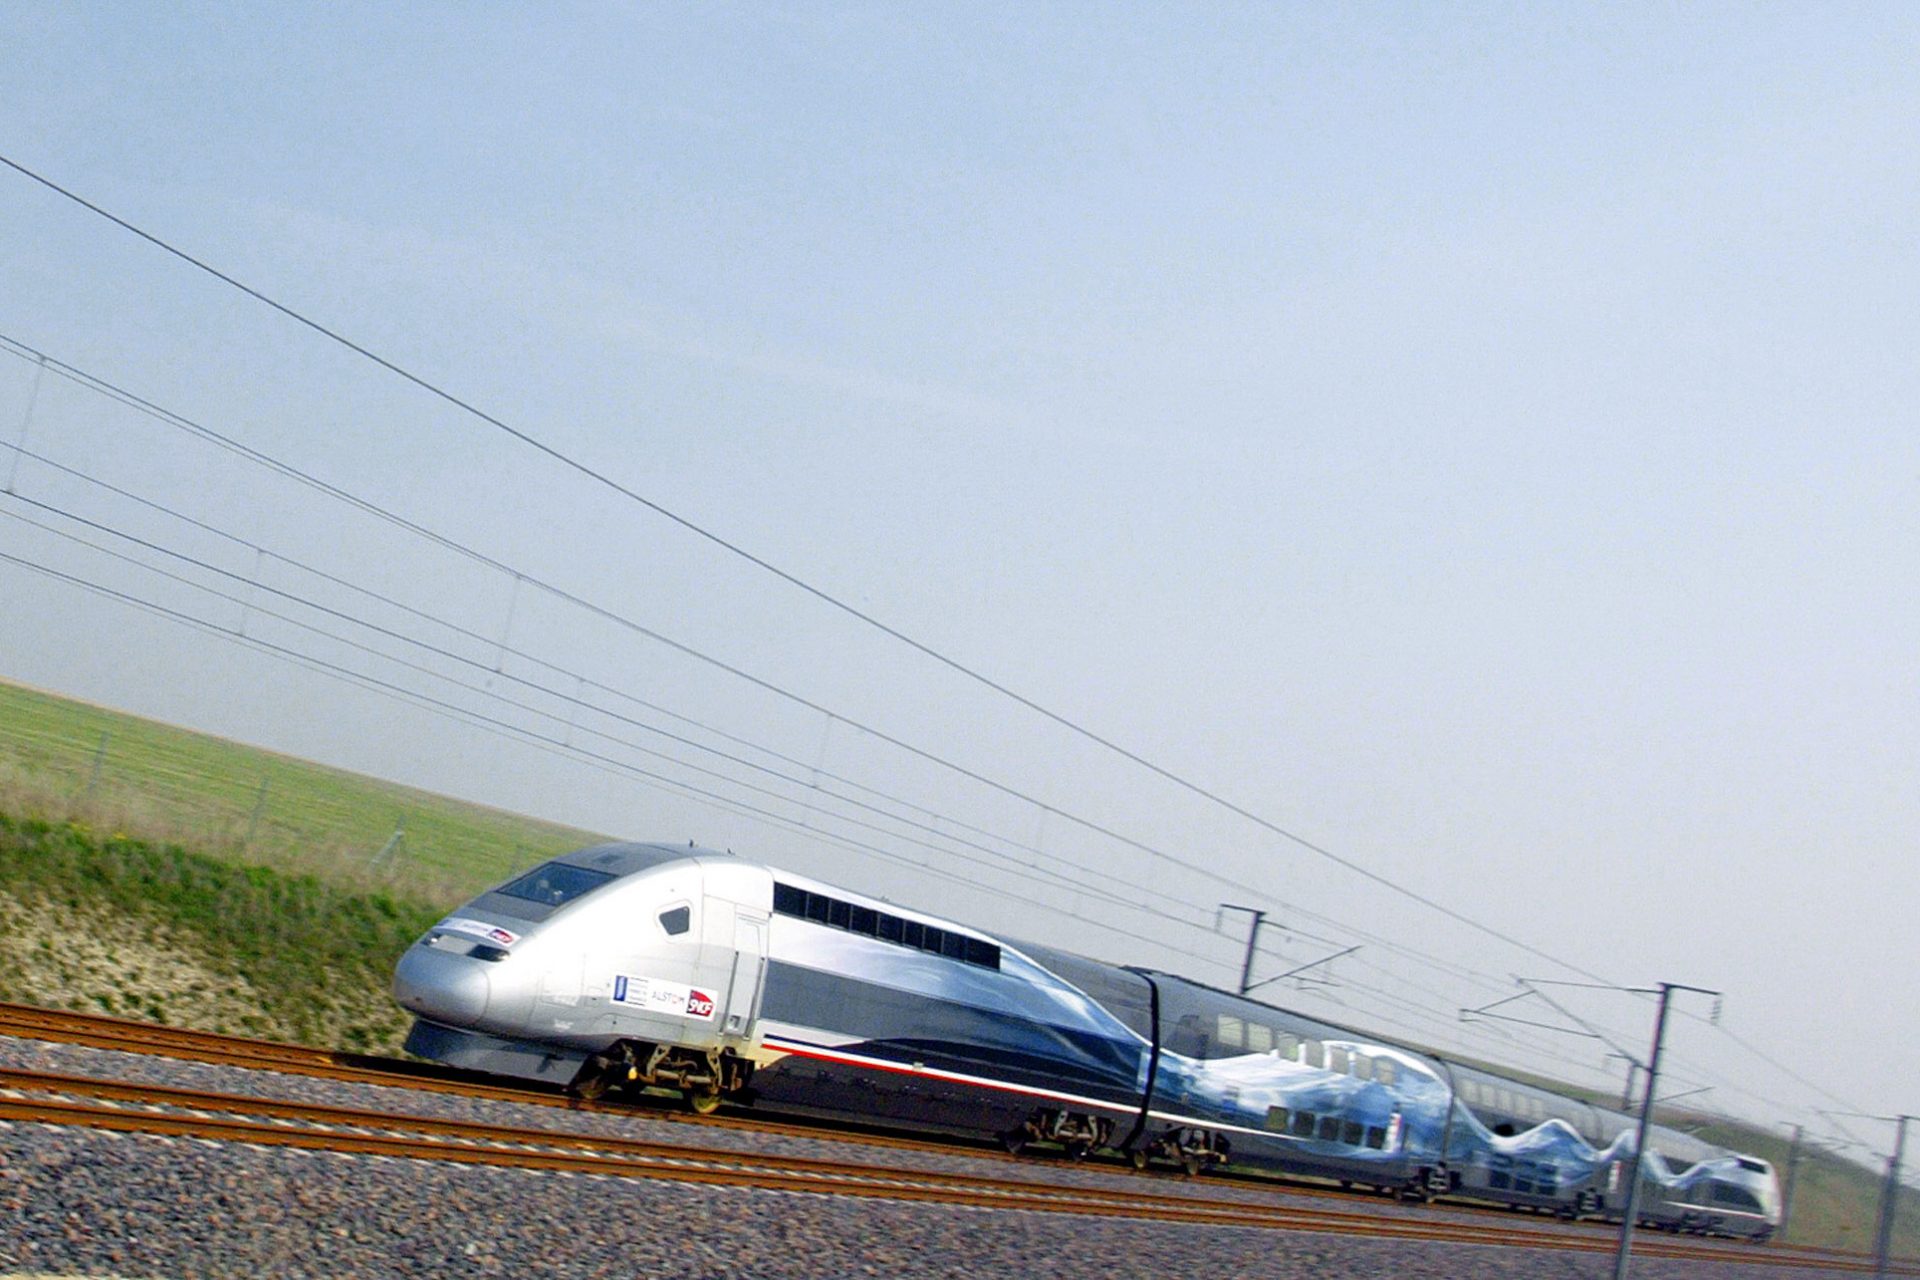 <p><span>In April of 2007, TGV set a world record in speed when a train reached an operating speed of 574.8 km per hour (357mph). TGV has sold their technology to other countries such as Spain, Italy, Morocco, the United States, South Korea, and Taiwan over the course of the past 30 years. </span></p>